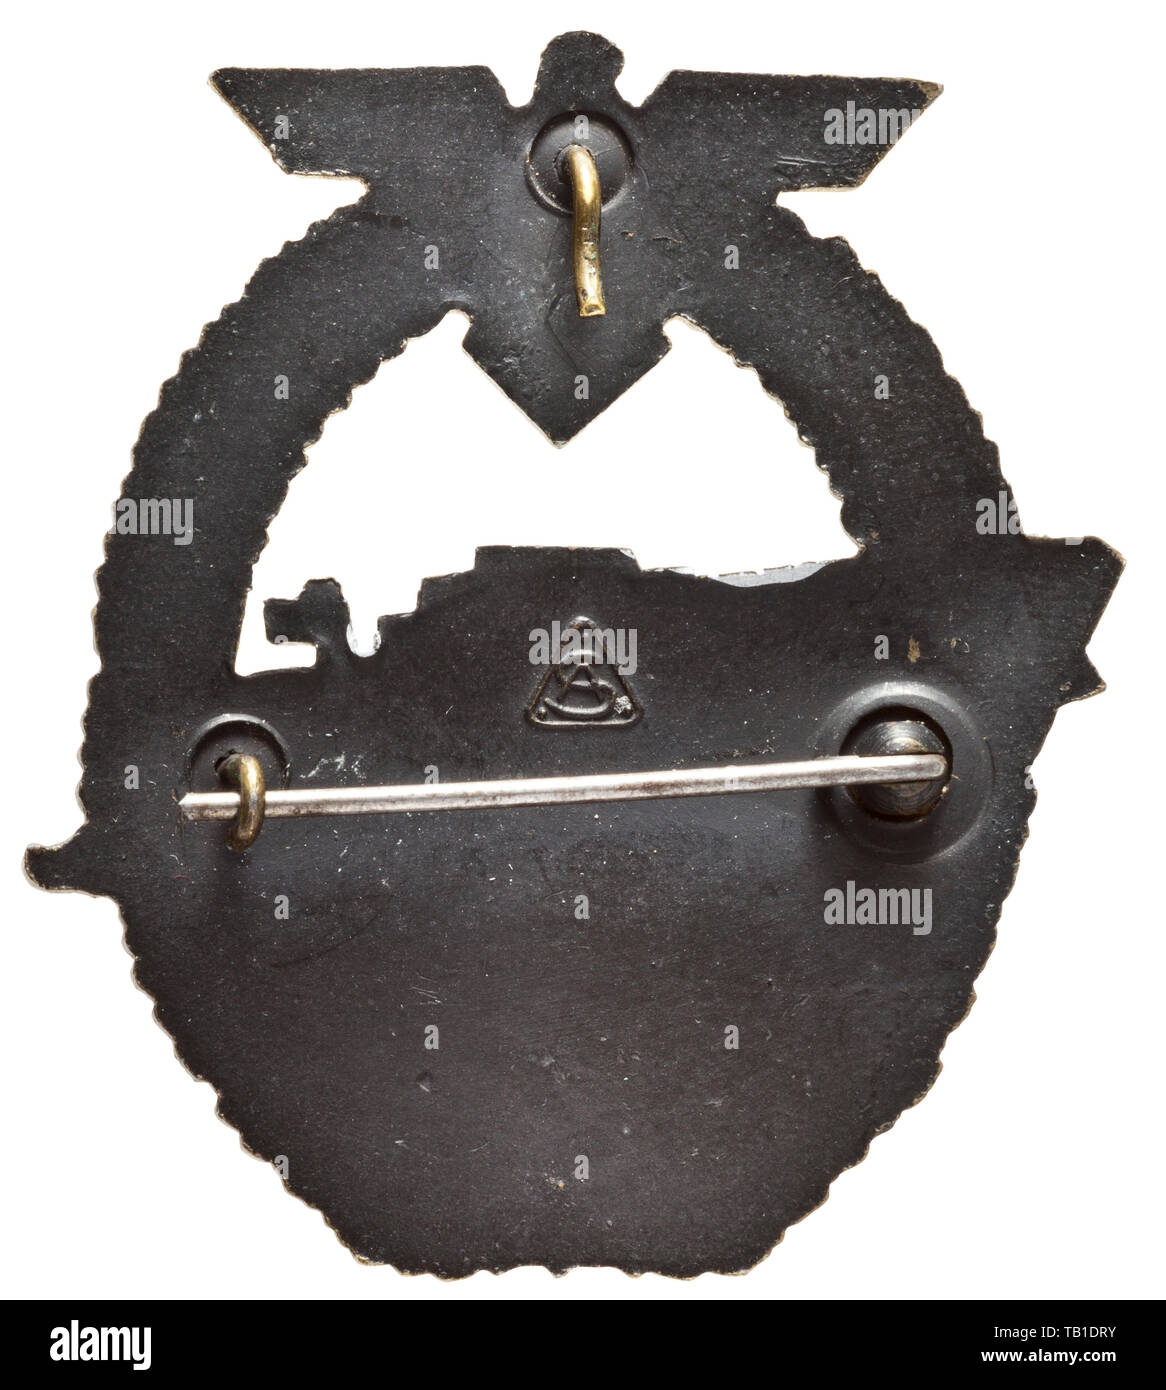 An E-Boat War Badge 2nd model, Manufactured in zinc by the firm Adolf Scholze in Grünwald a.d. Neiße, with horizontally affixed attachment pin system and maker's logo 'AS' within a triangle. Lightly used badge with almost completely preserved gilding, the reverse blackened. Width 52.7 mm. Weight 31.7 g. The zinc badges produced by the Scholze firm of the 2nd model in use from January 1943 with the larger depiction of the new S-38 boat type are, for the period, of outstanding workmanship. These models are among the rare examples that have retained their gilding as well as th, Editorial-Use-Only Stock Photo